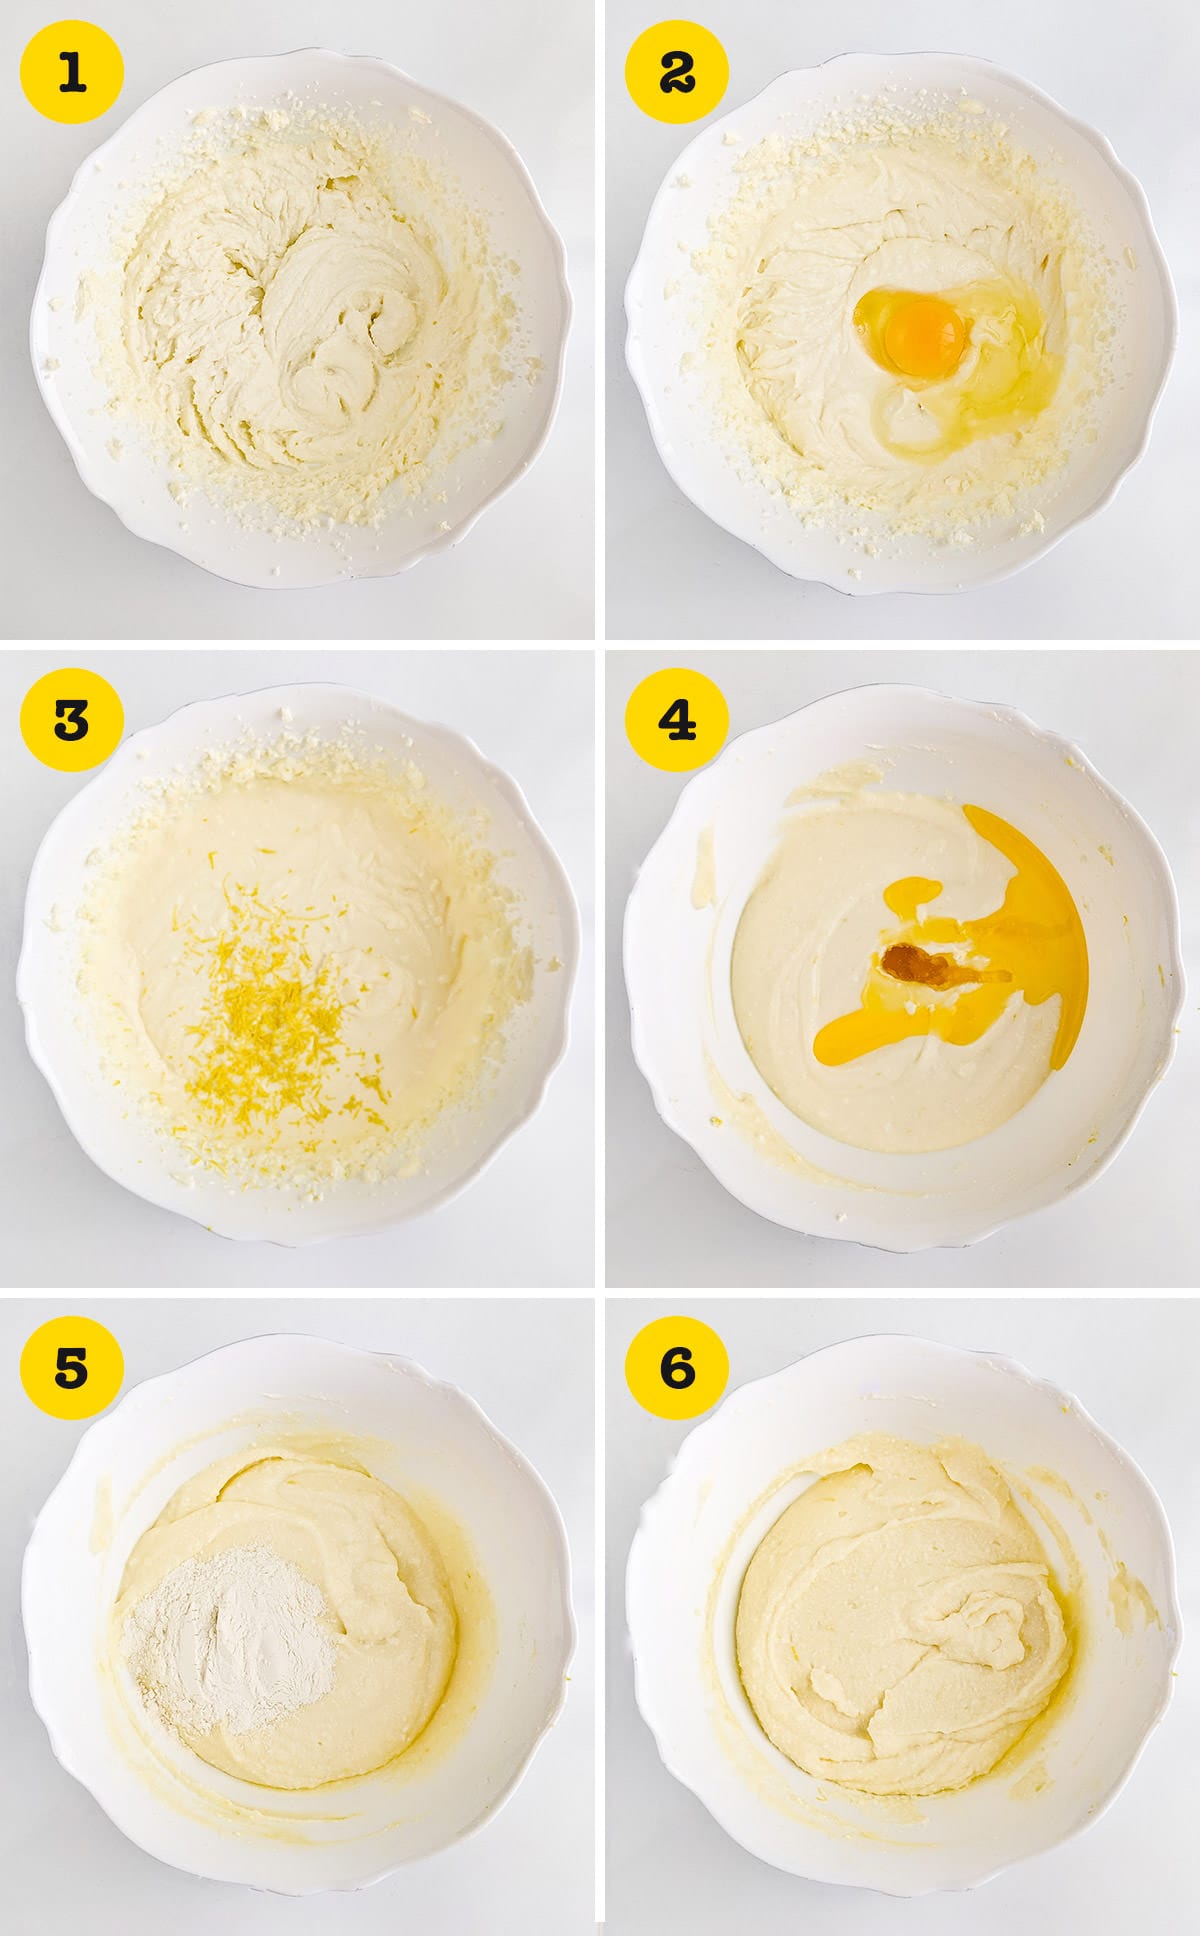 Step-by-step instructions on how to make cheese cake cream.